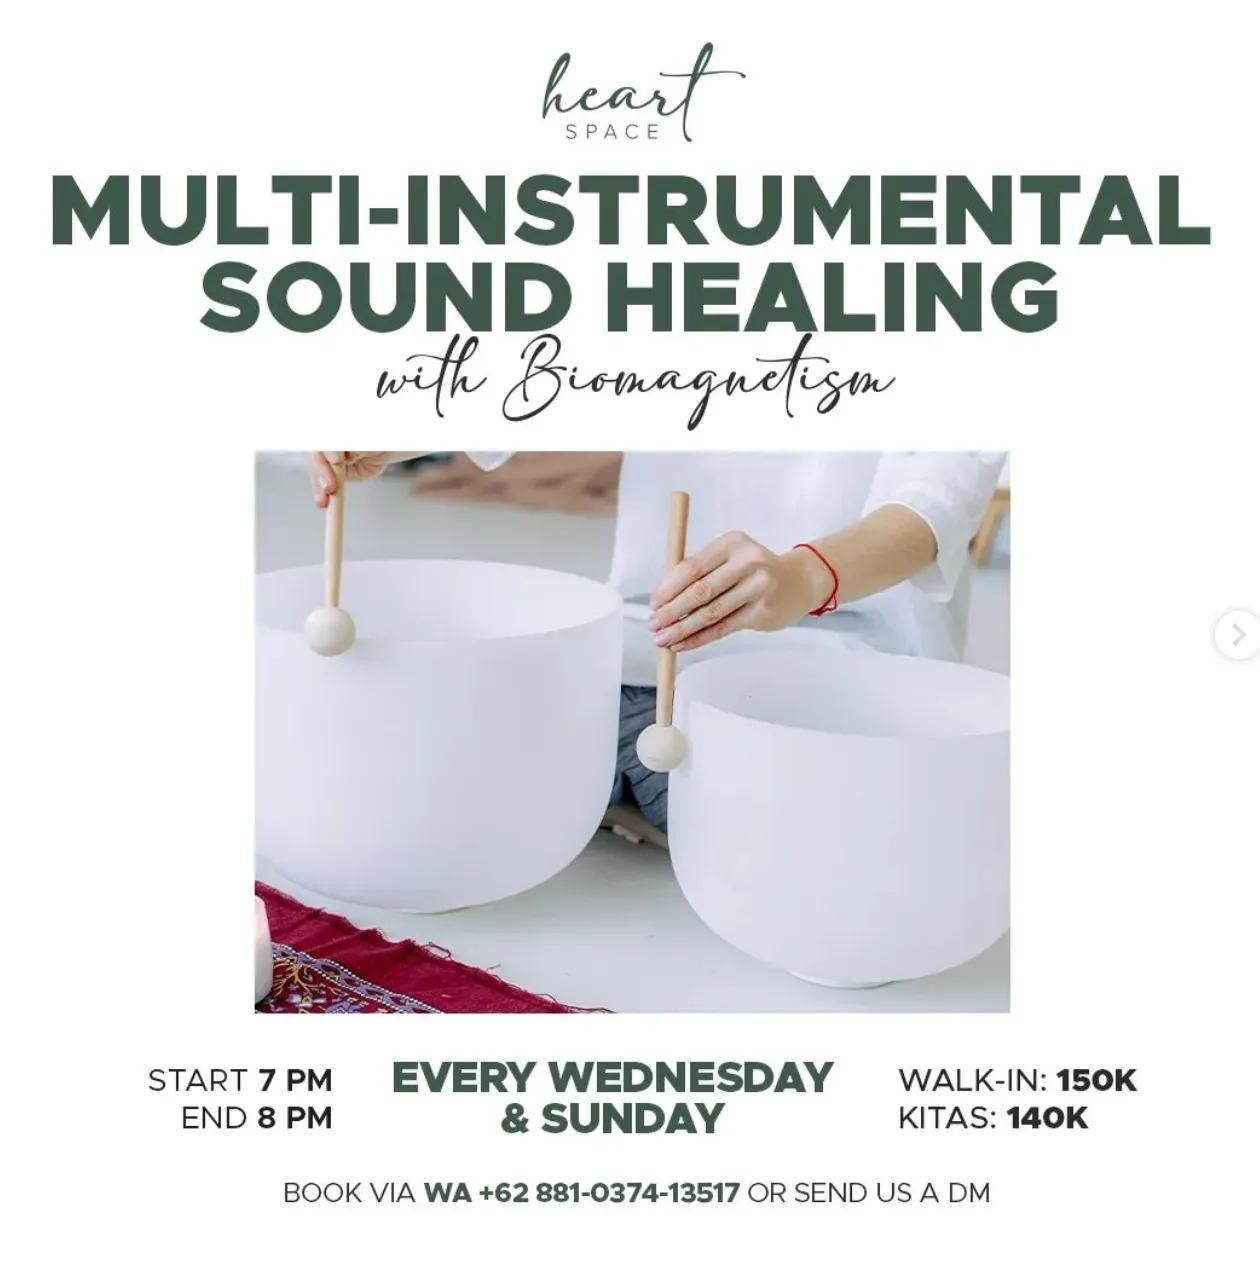 Event at Heart Space - Healing & Yoga every Wednesday 2024: Multi-Instrumental Sound Healing with Biomagnetism